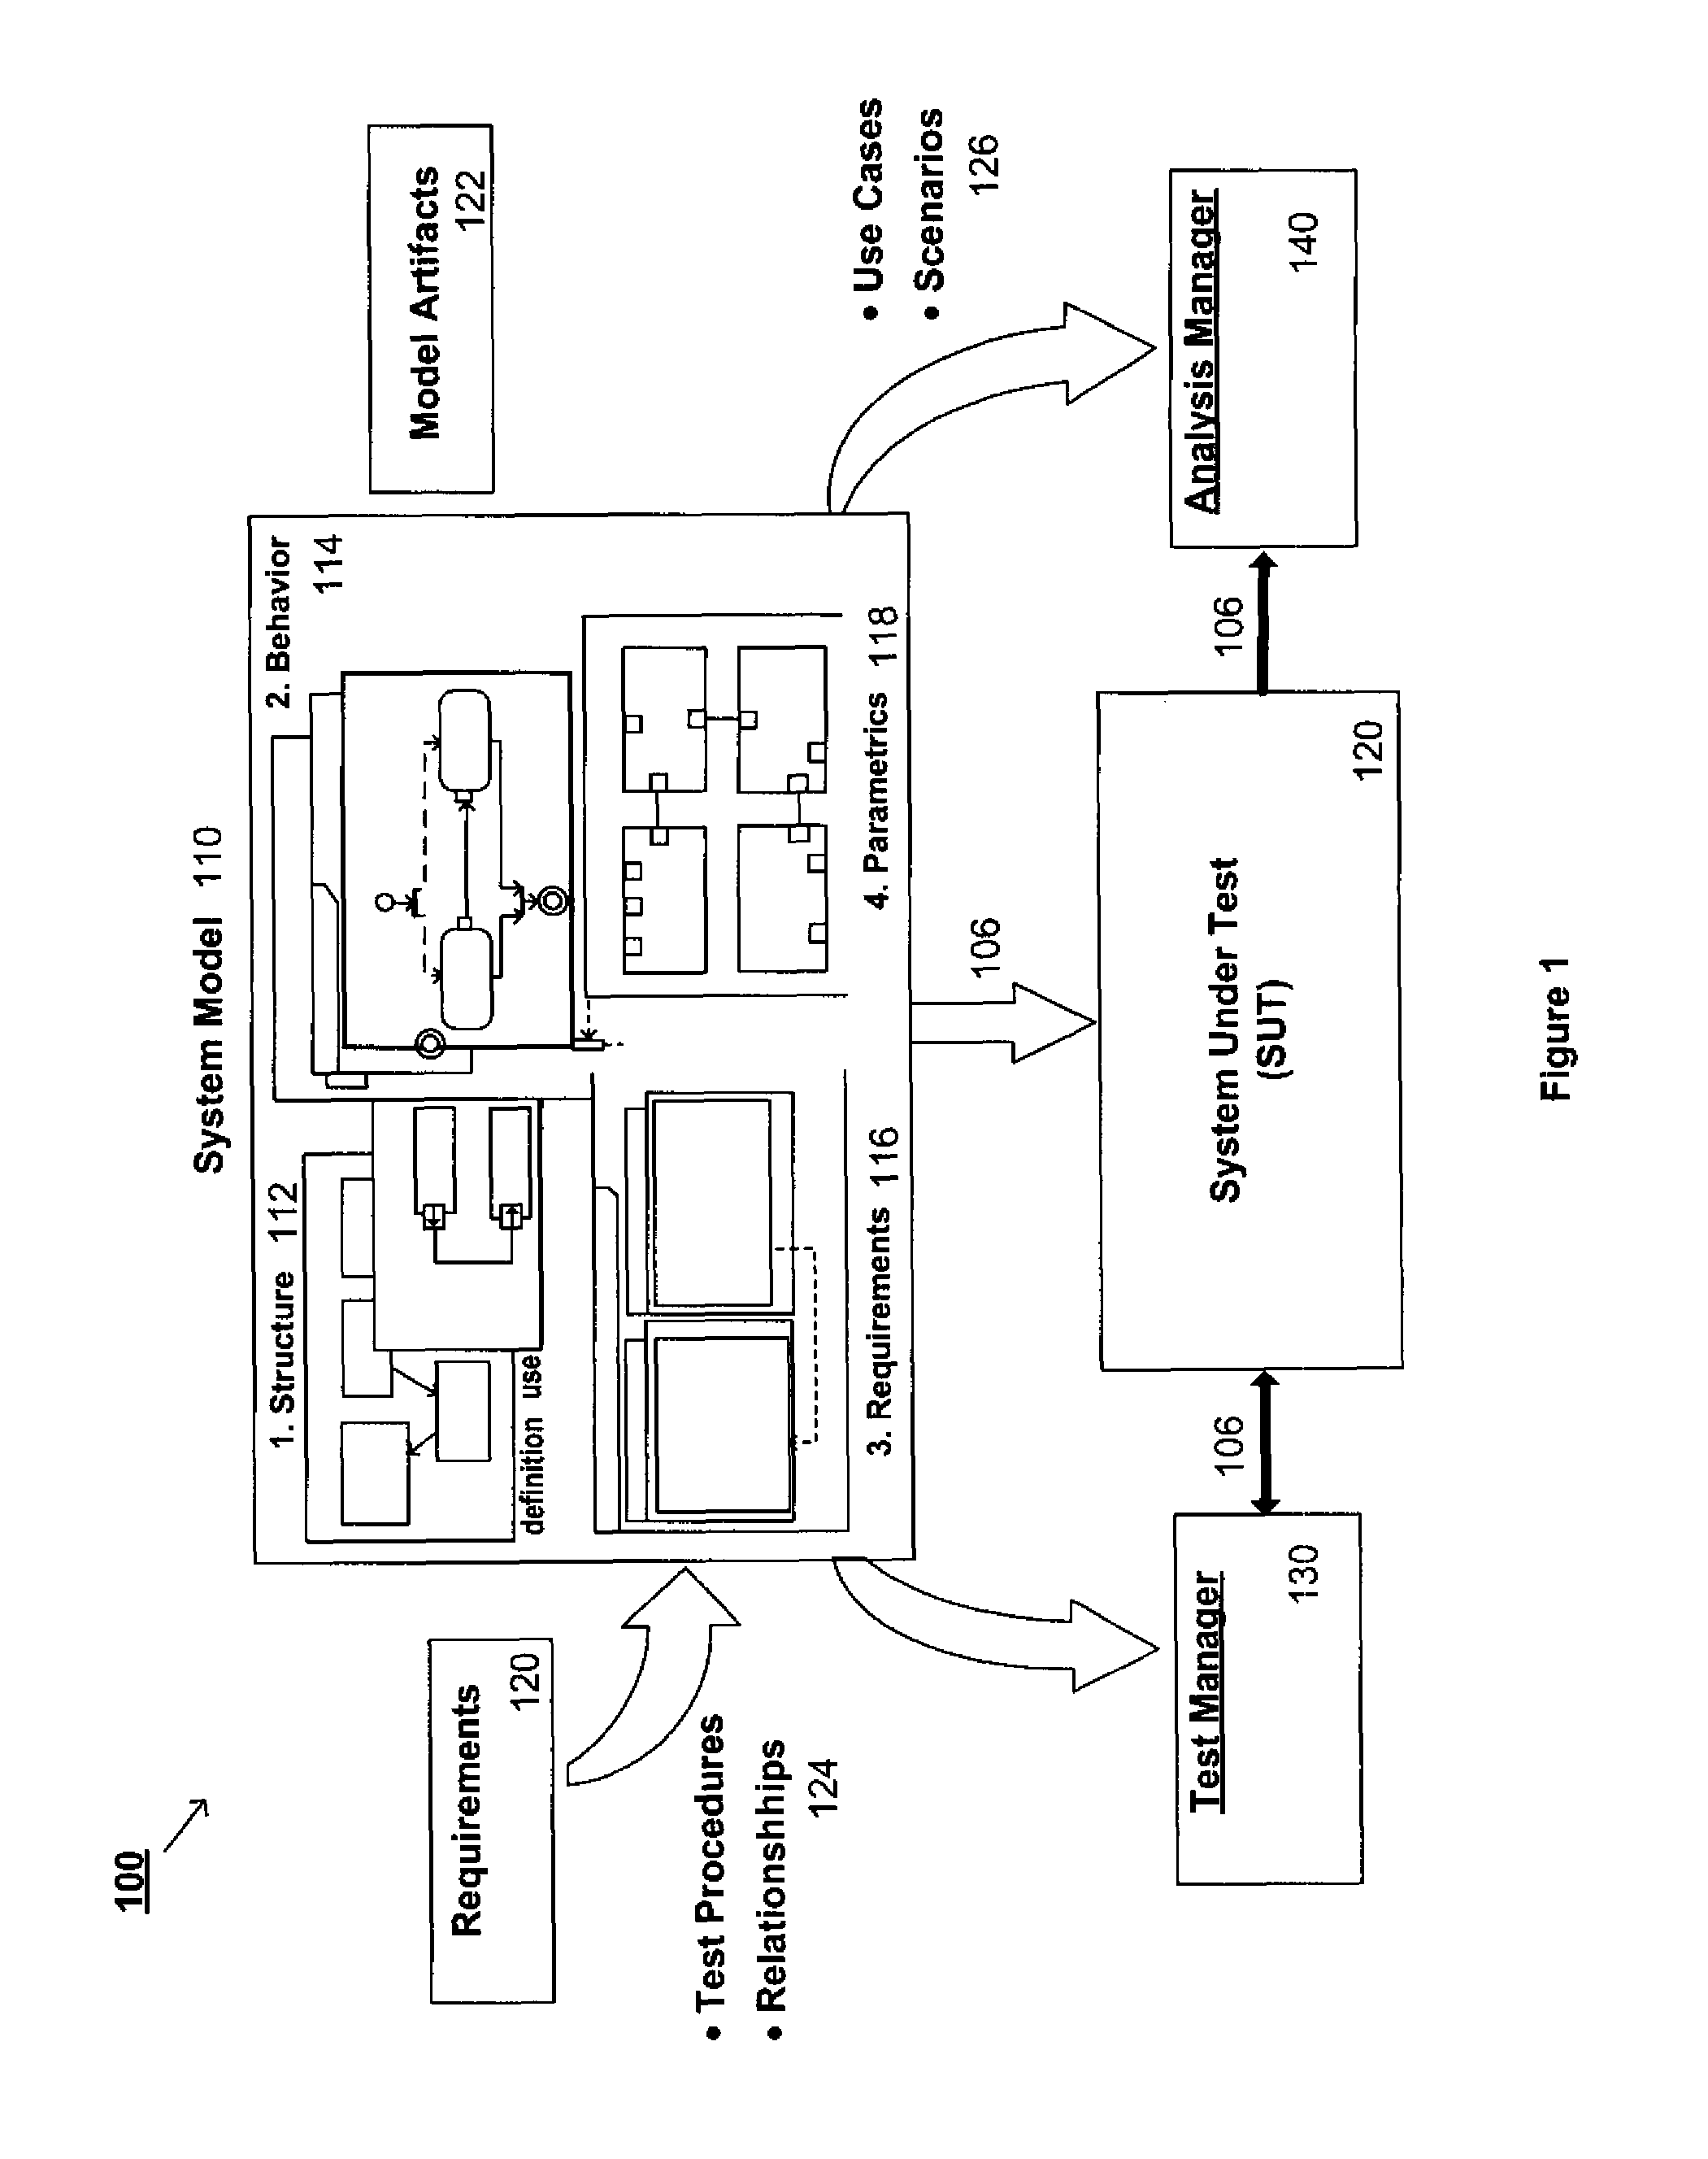 Method and system for implementing automated test and retest procedures